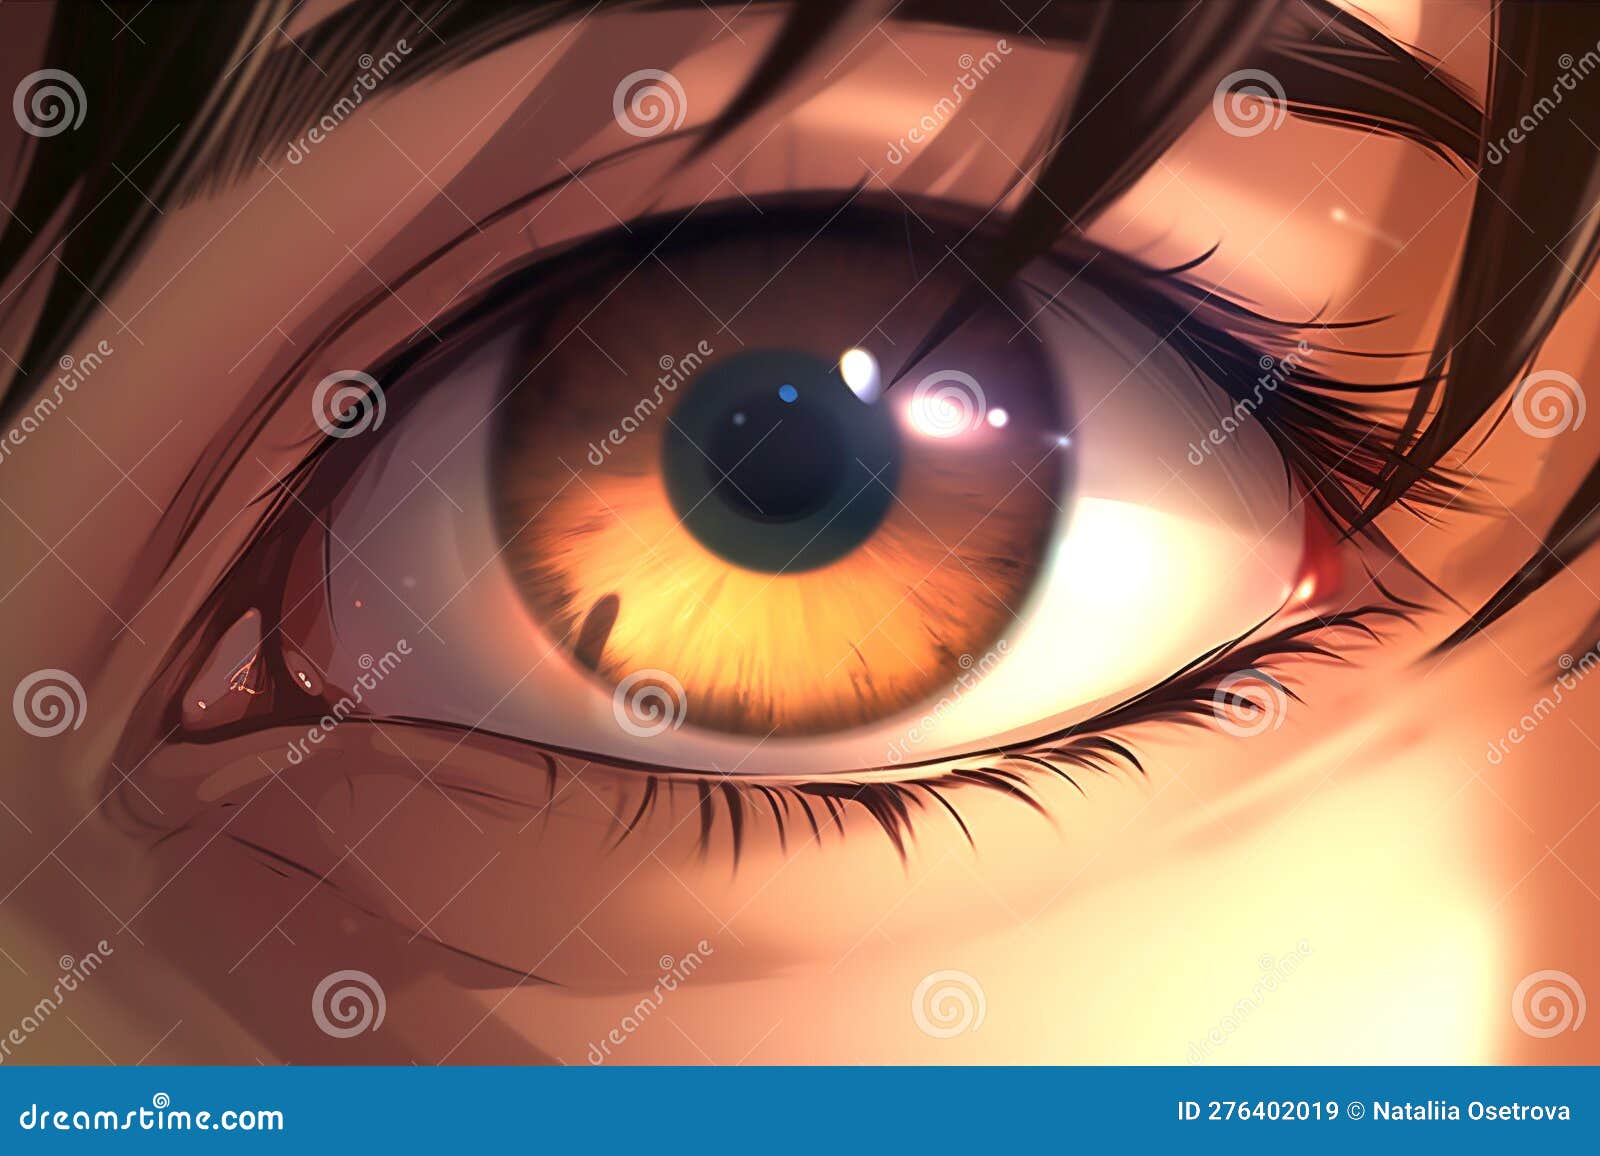 How to Draw Different Types of Anime Eyes  AnimeOutline